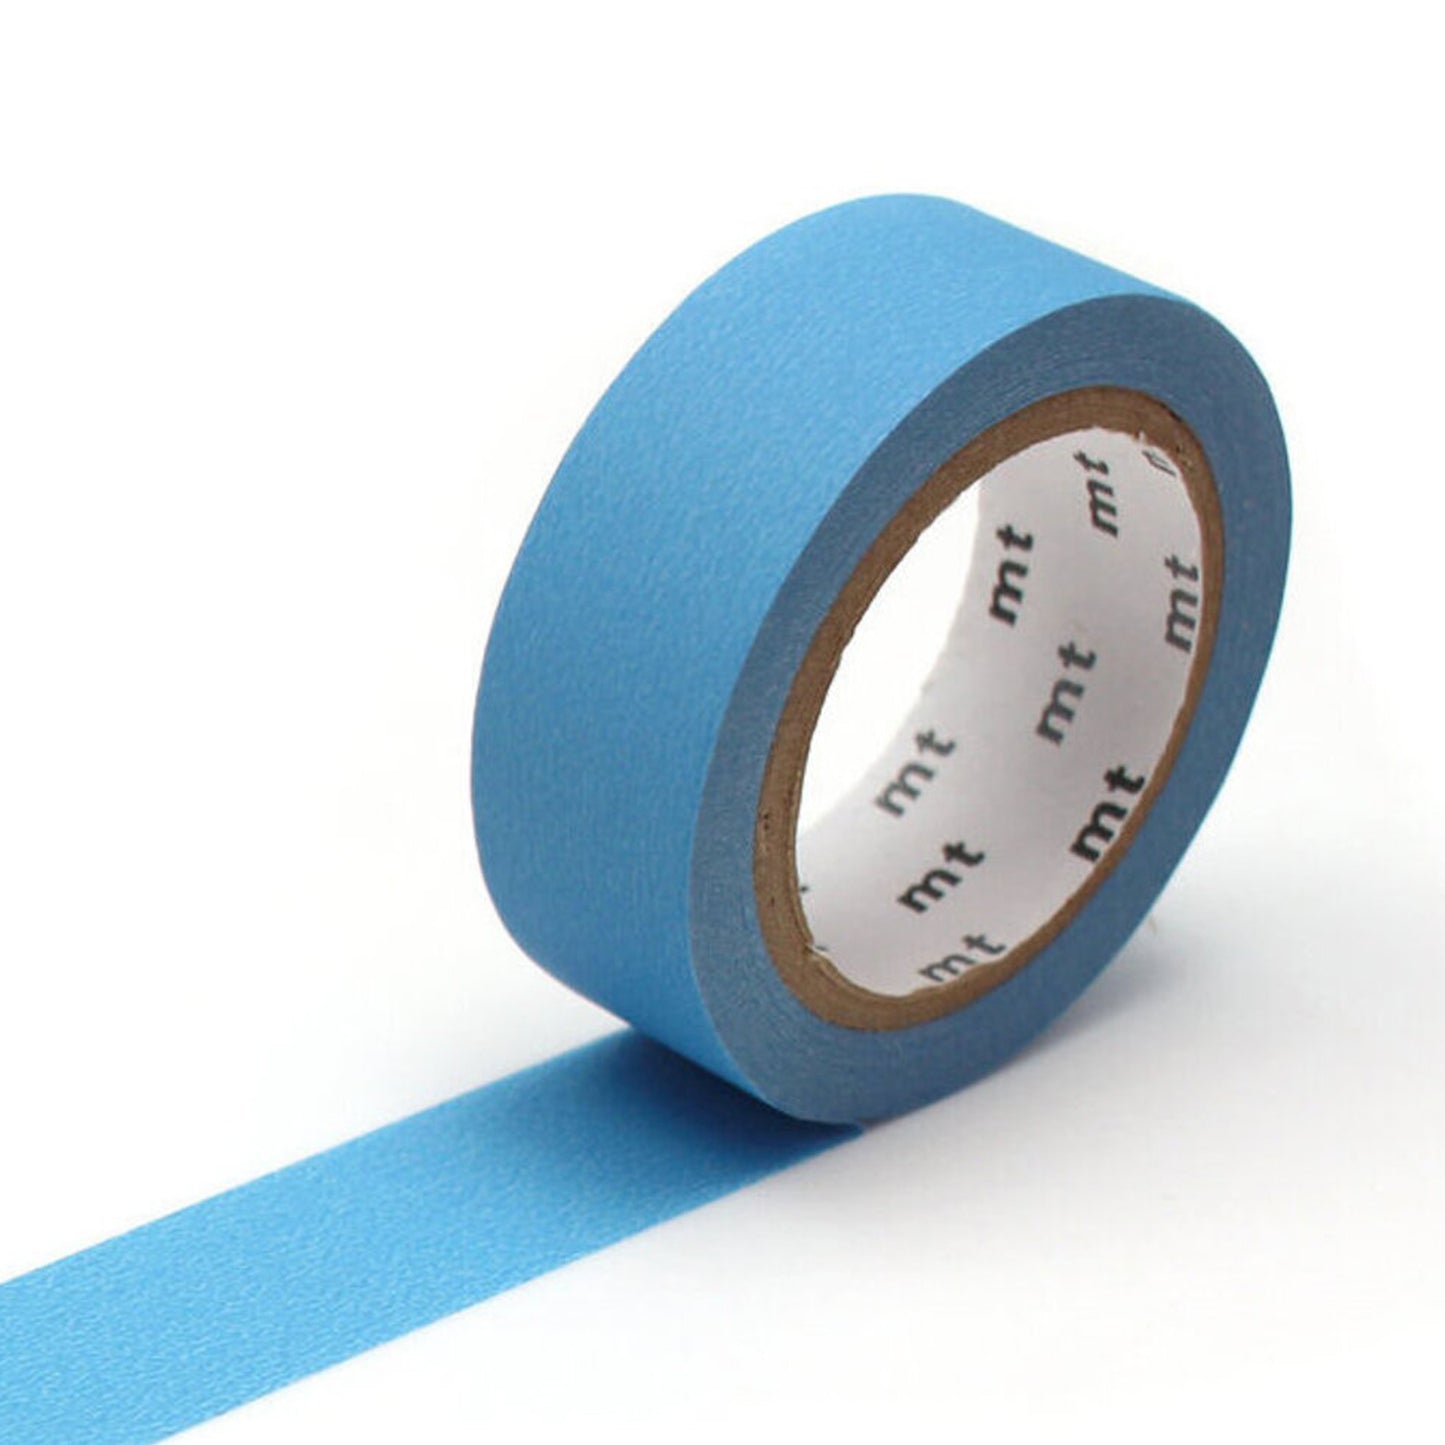 Washi Tape in Solid Matte Colors by MT